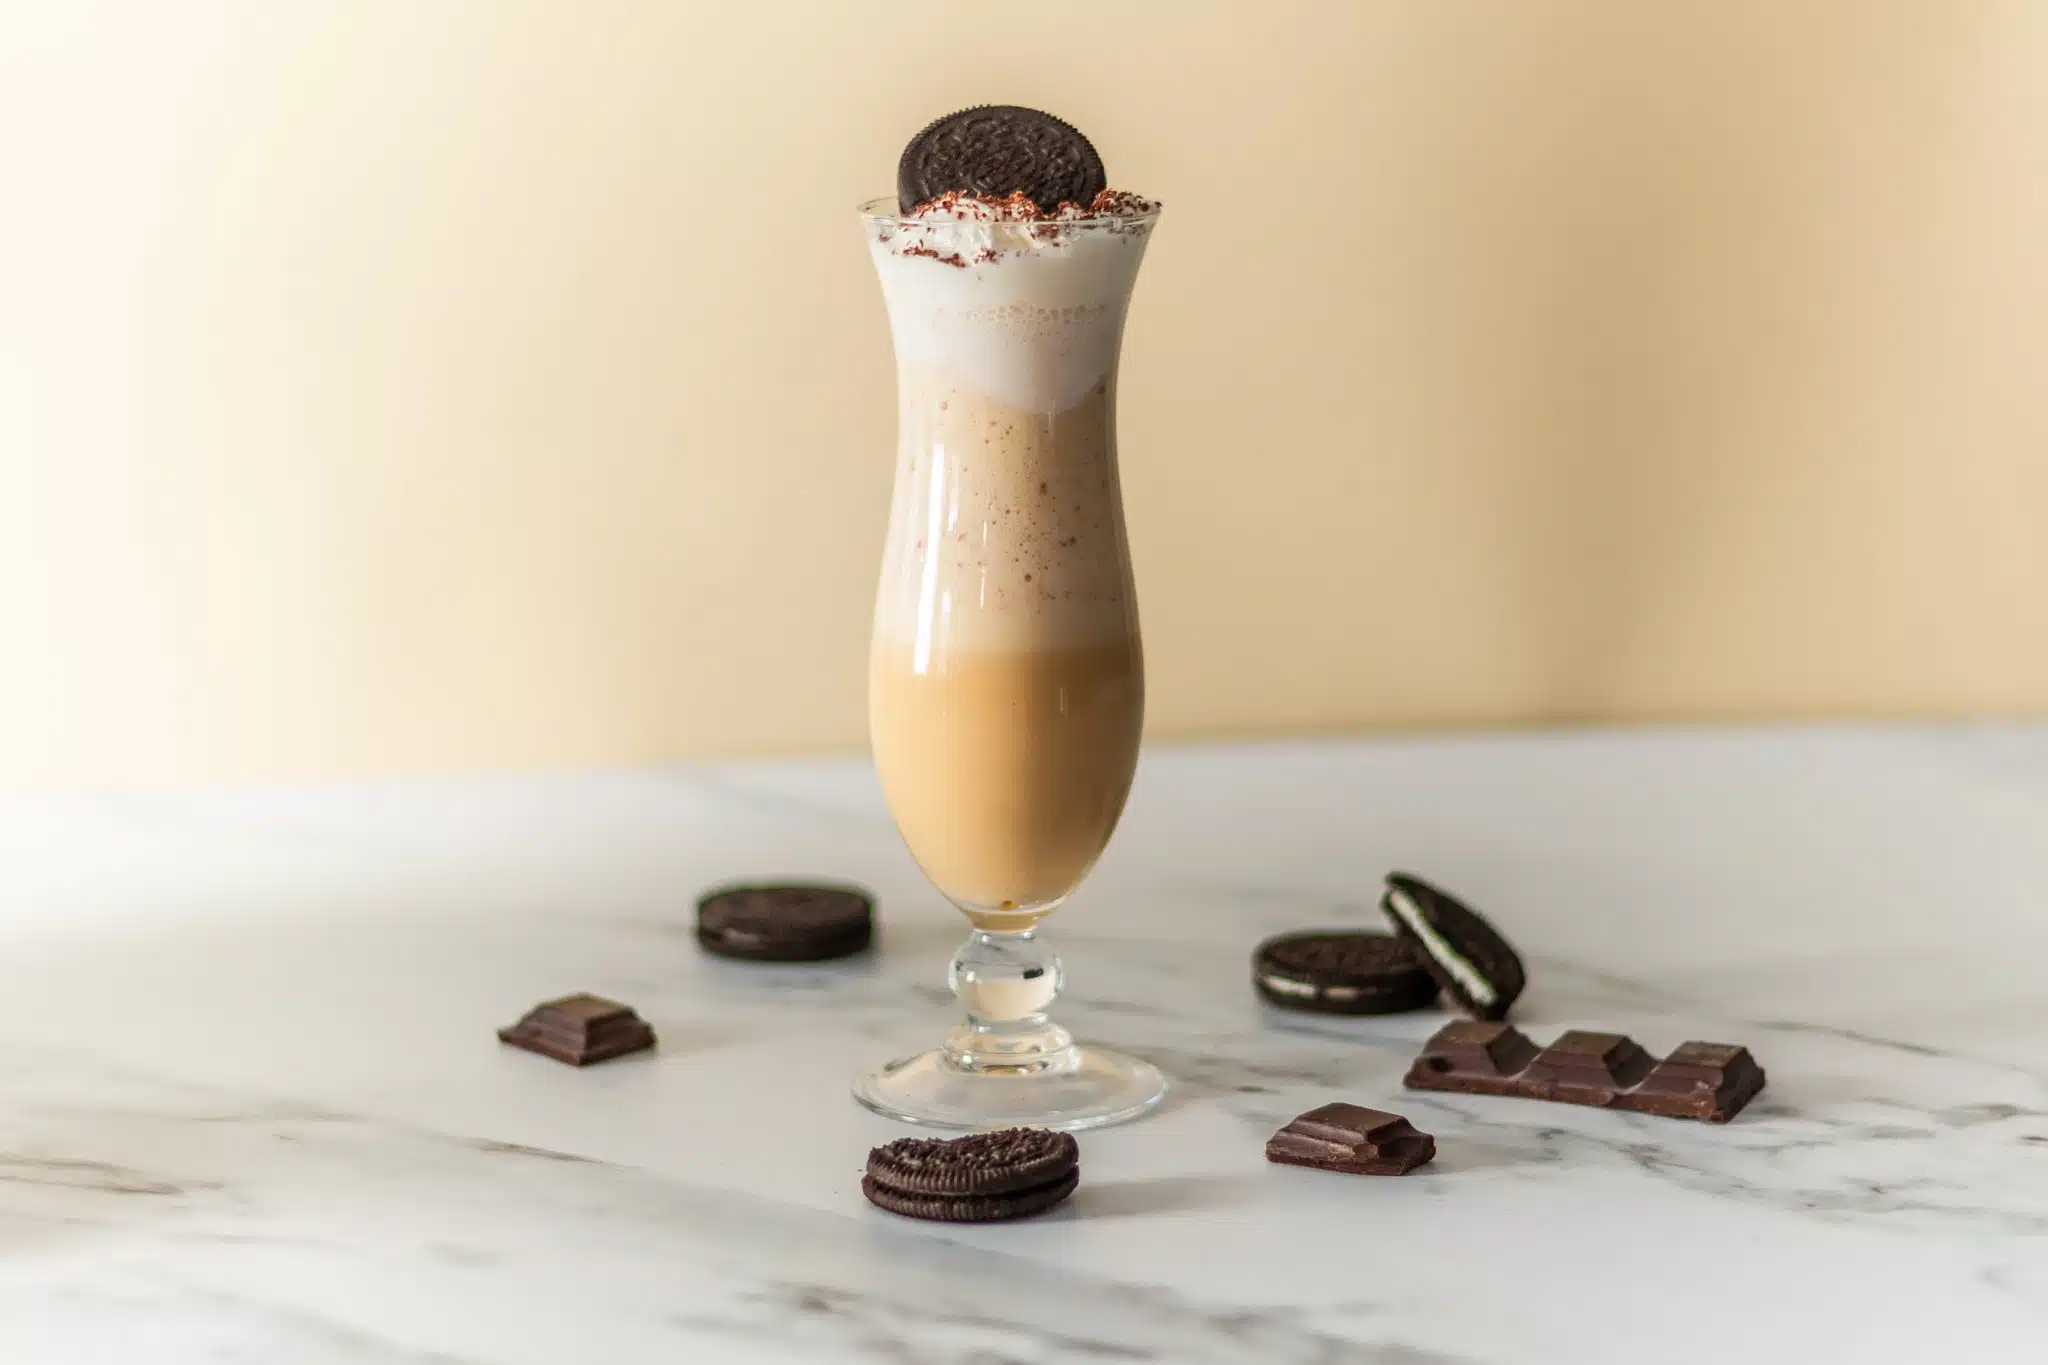 A side shot of a Mudslide cocktail in a hurricane glass on a white marmol table surrounded by Oreo cookies and chocolate blocks